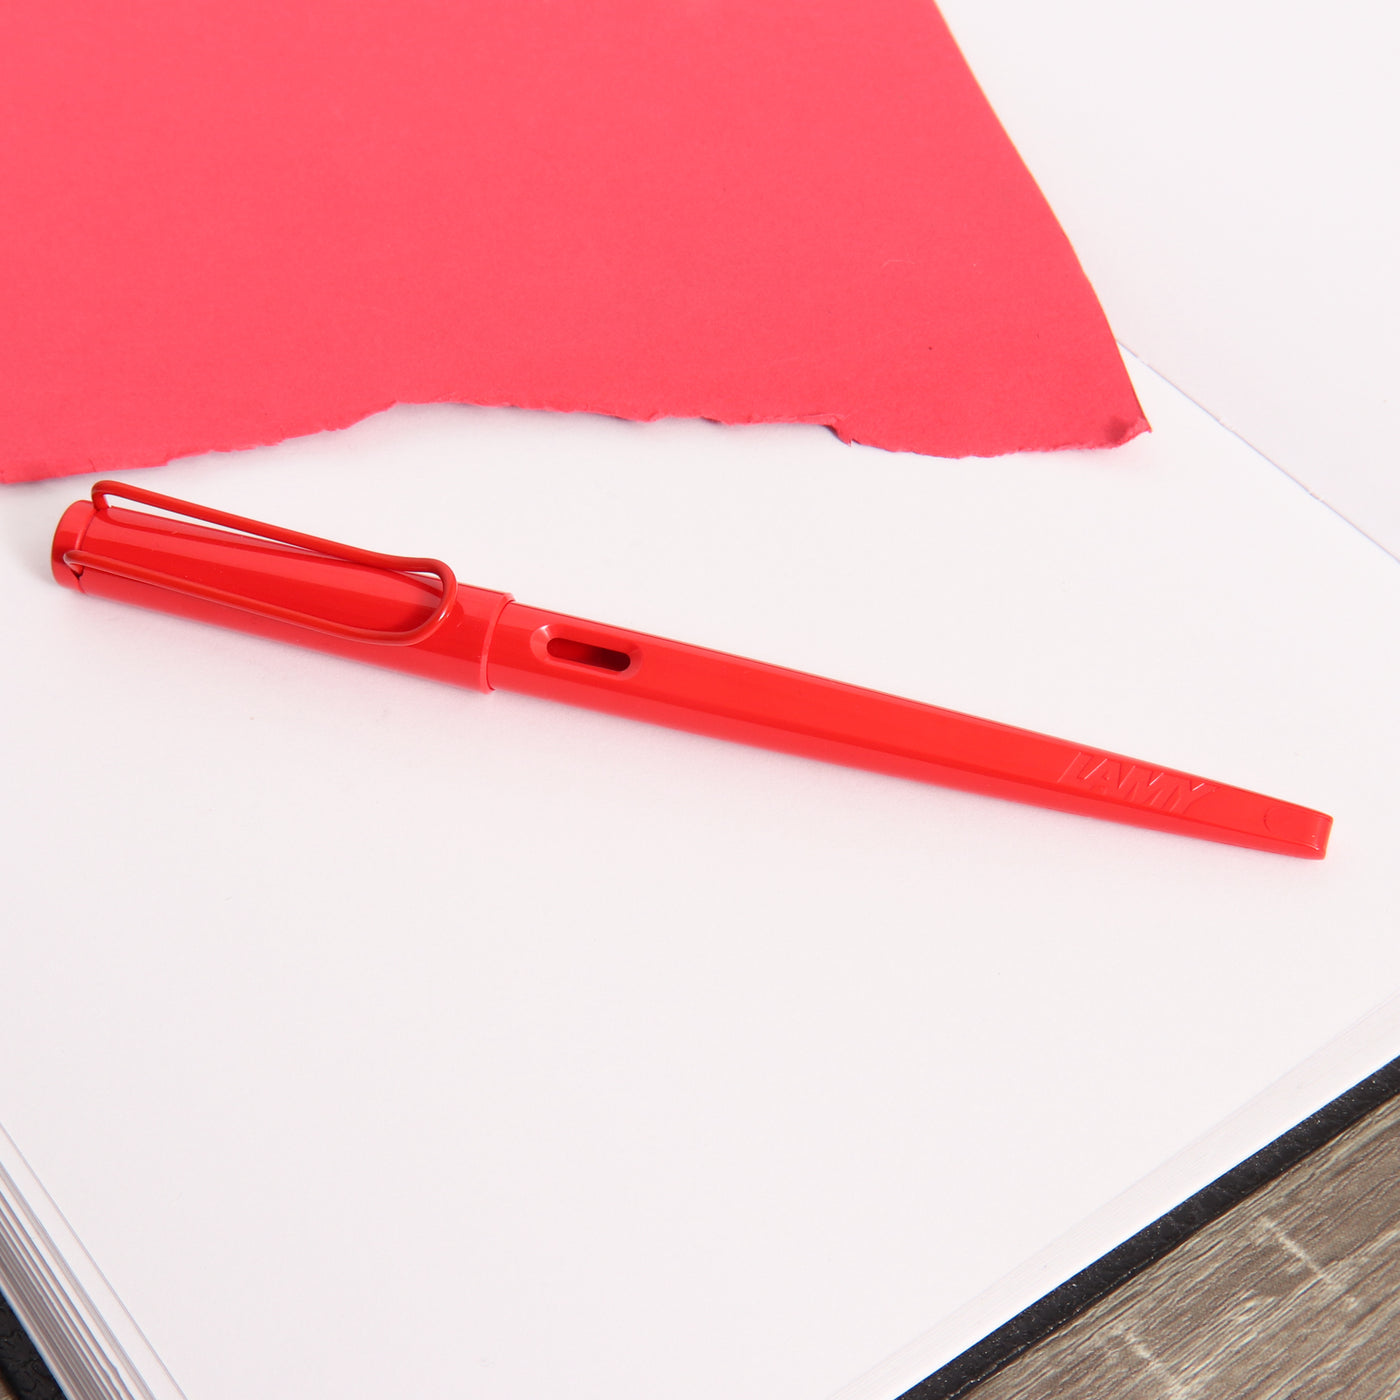 LAMY Joy Special Edition Strawberry Fountain Pen Capped